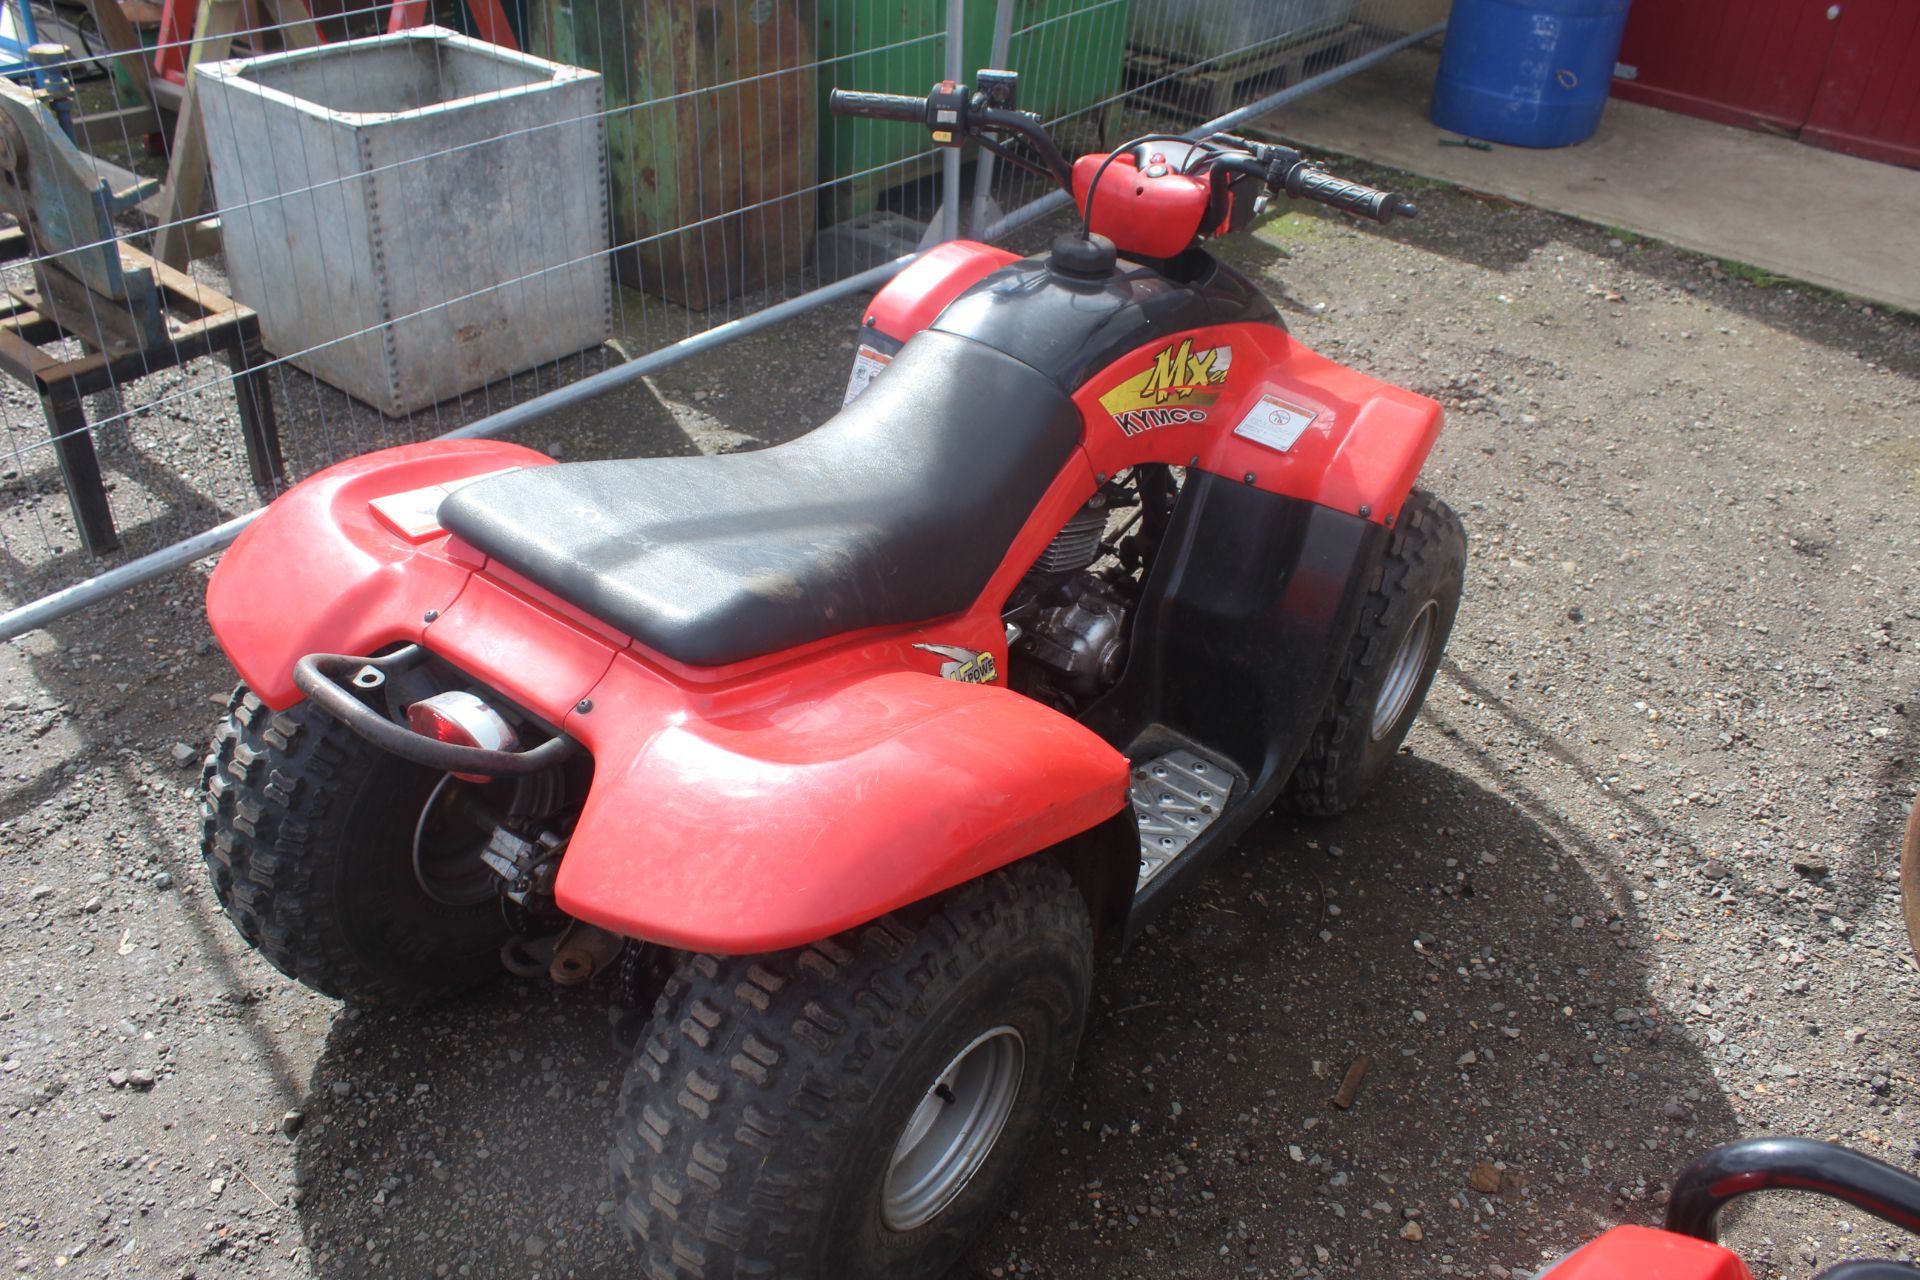 Kymco MX'er 150cc off road ATV. 2004. owned from new. Key, Manual held. - Image 4 of 18